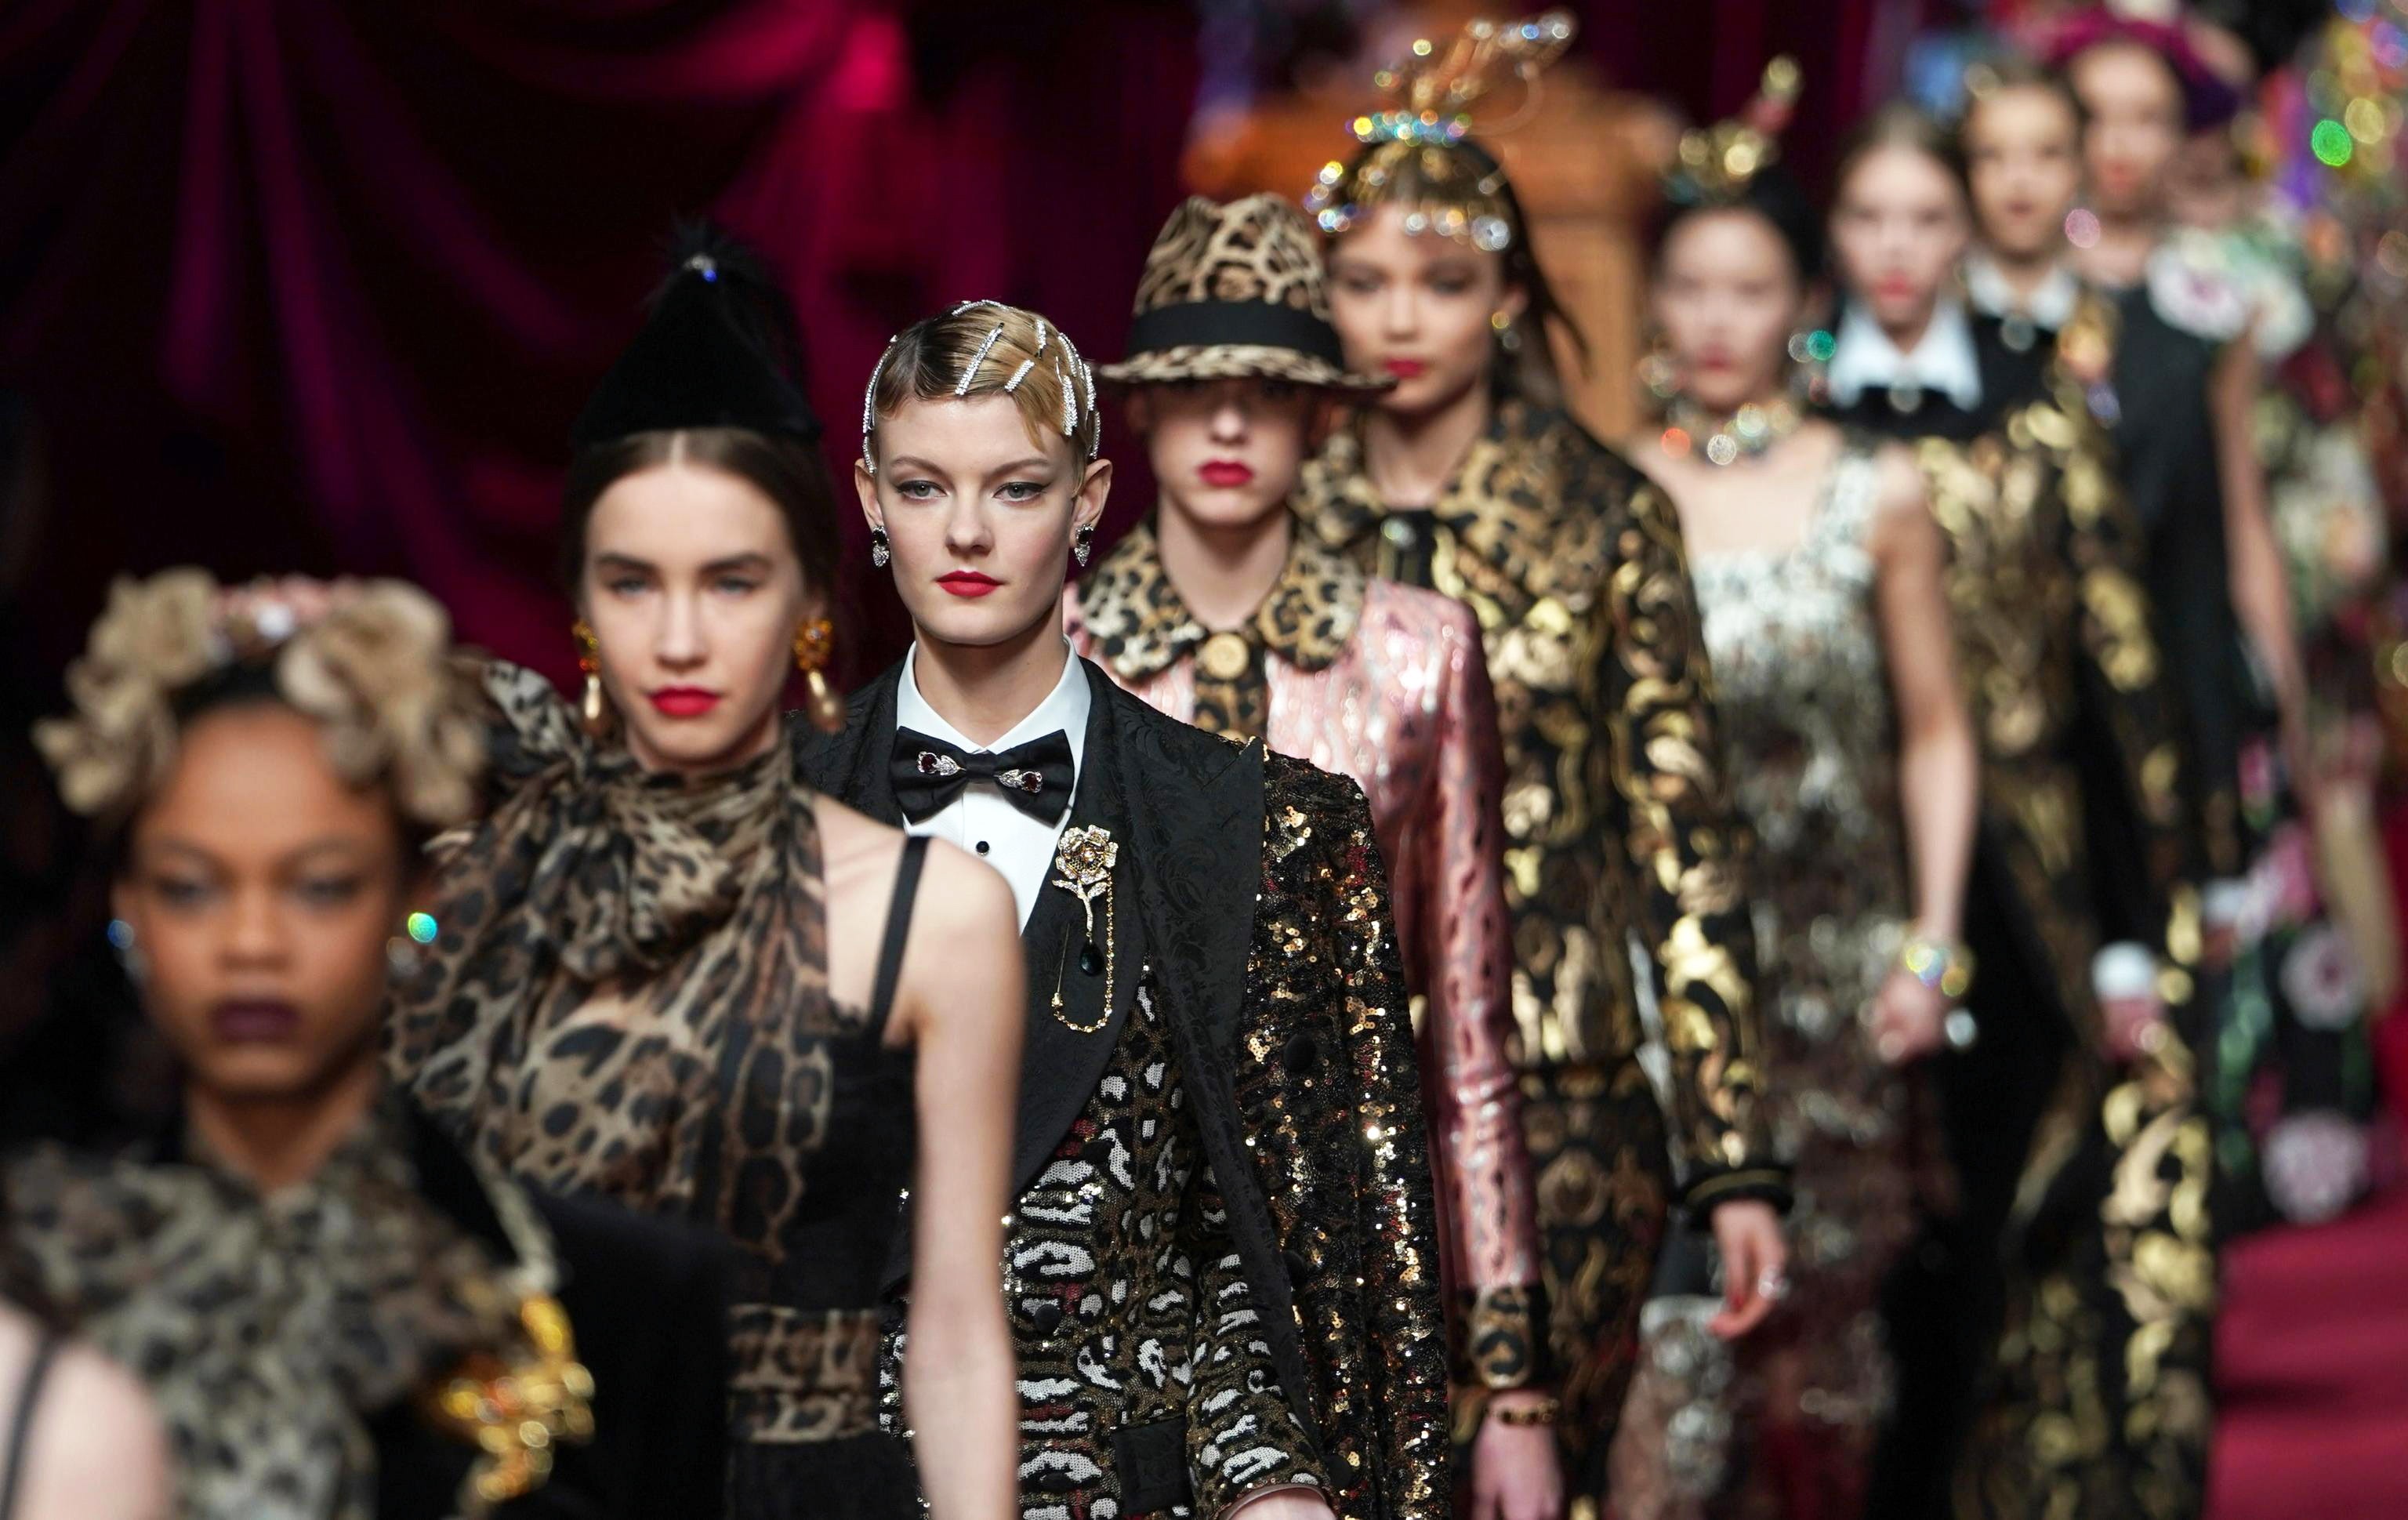 Dolce & Gabbana sees sales slowdown in China after ad backlash